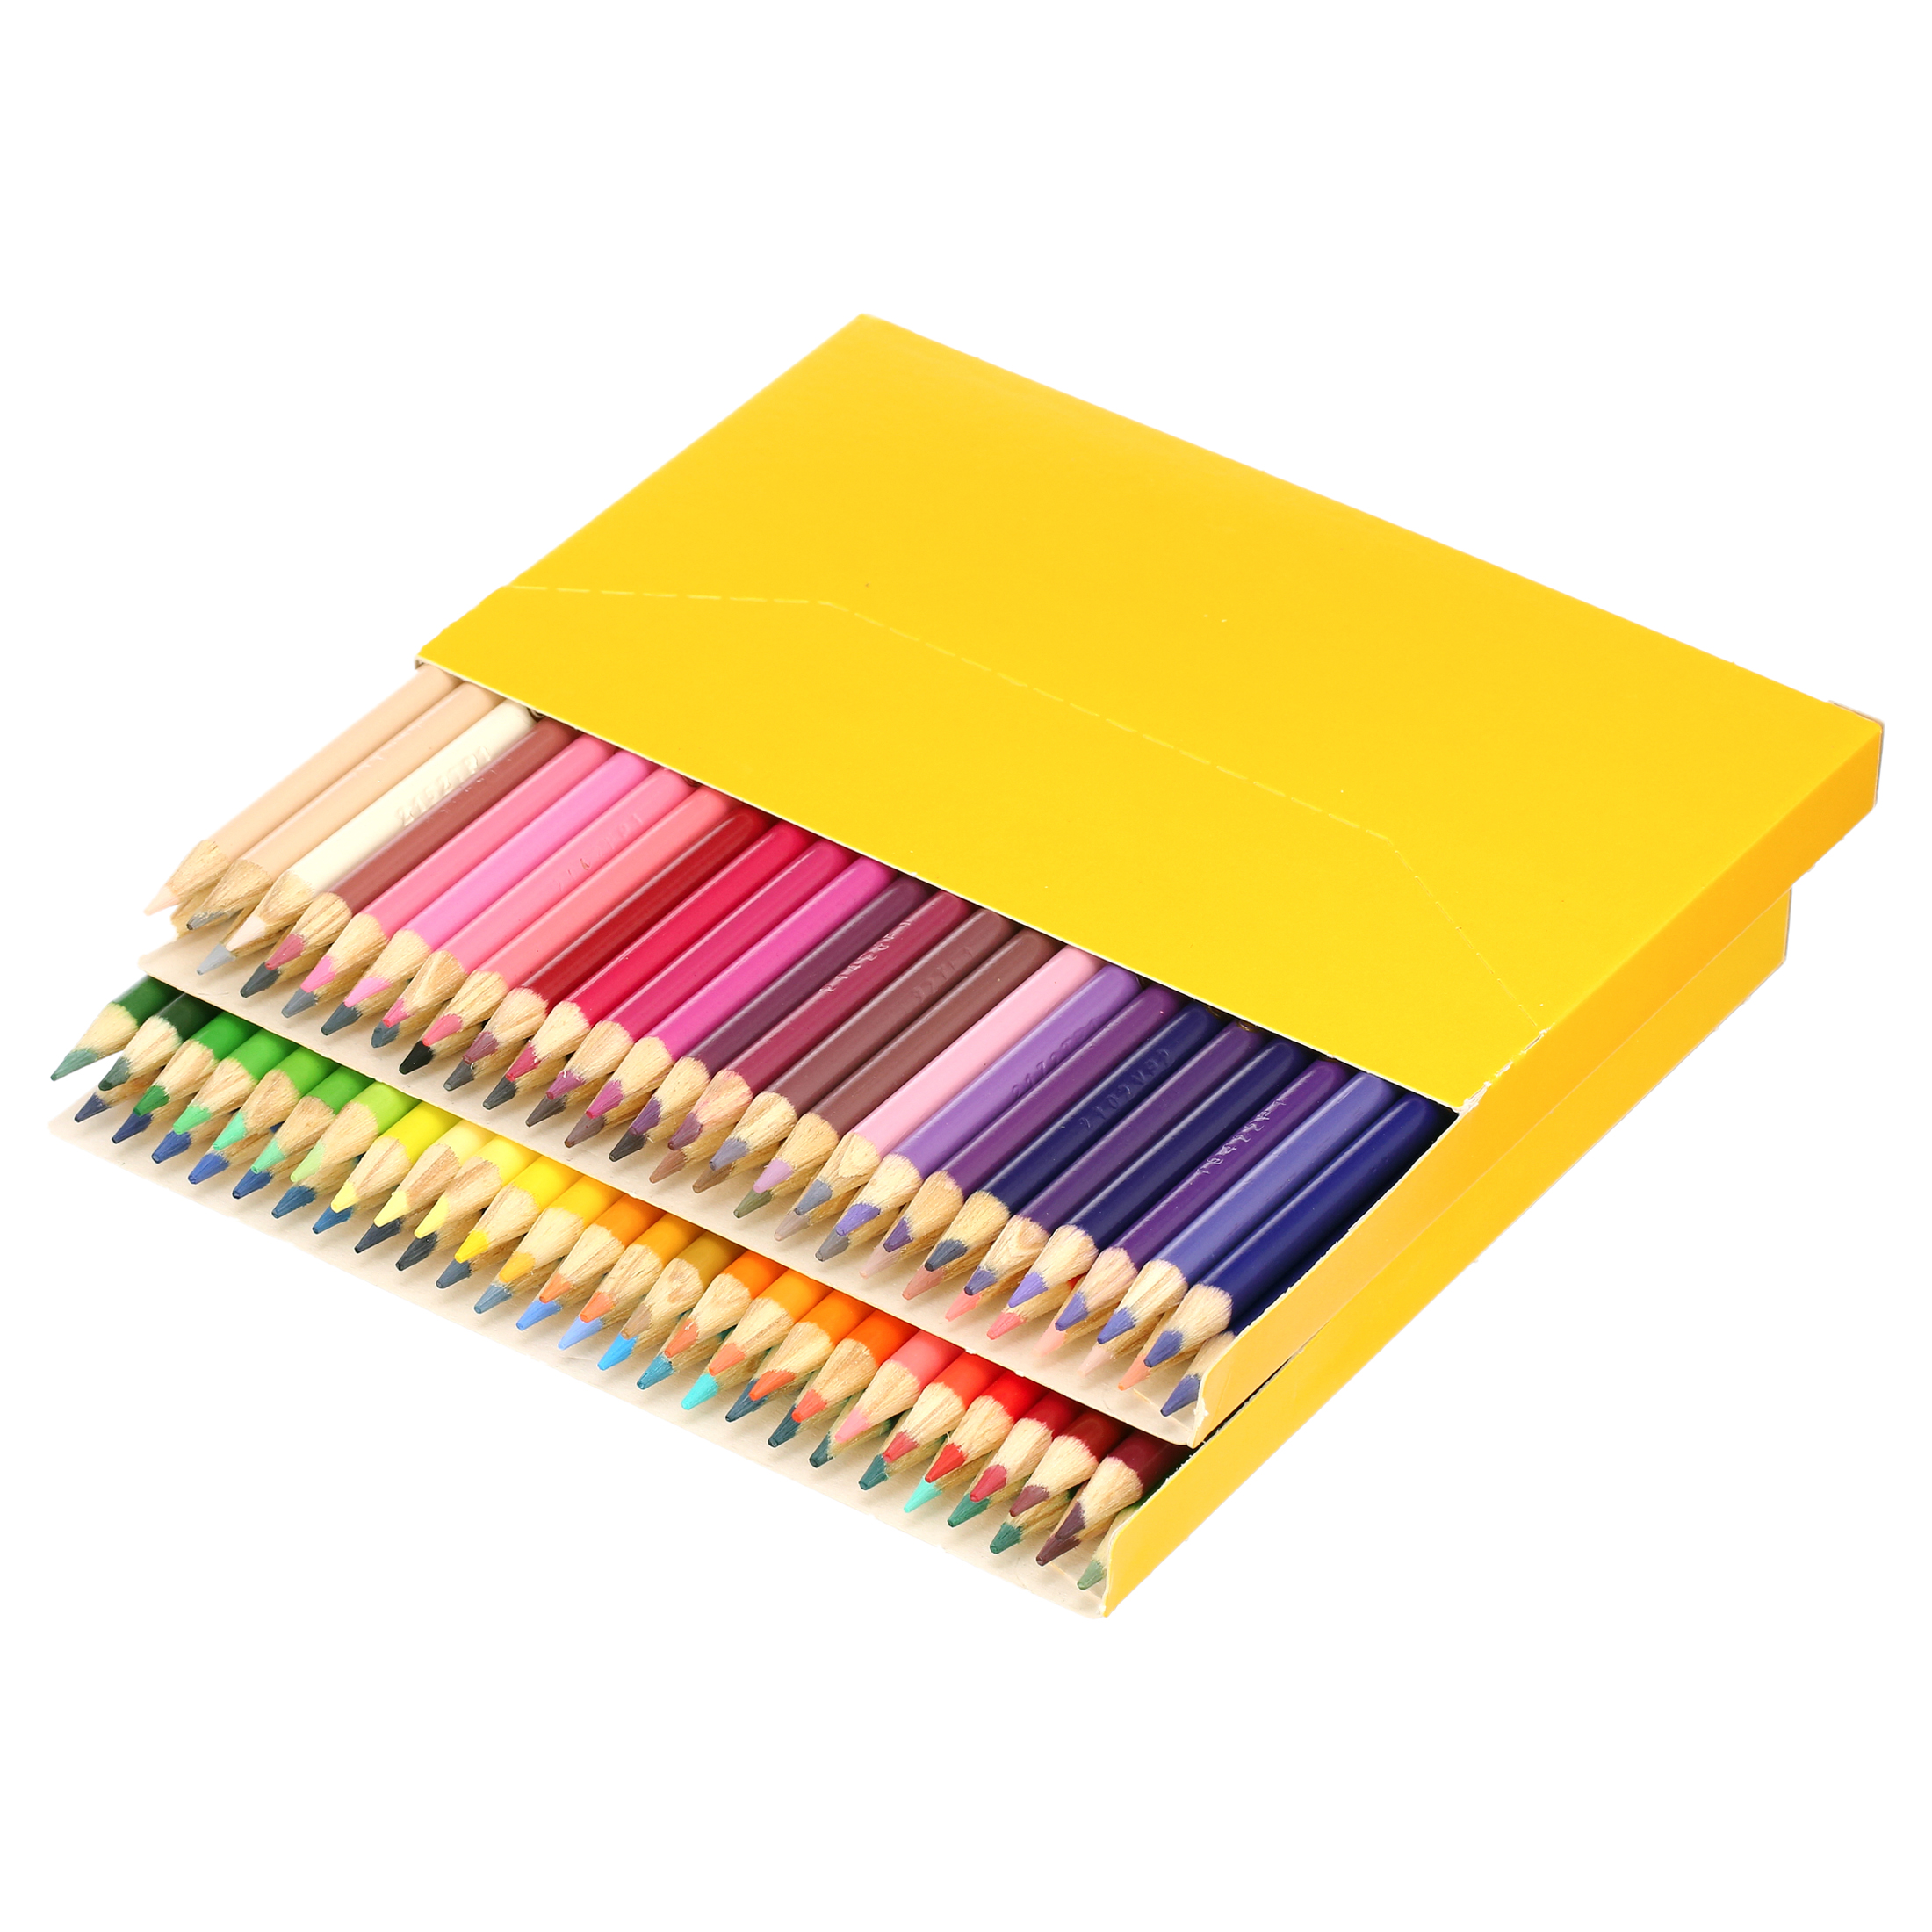 Crayola Colored Pencil Set, 100-Colors, Beginner Child - image 2 of 5